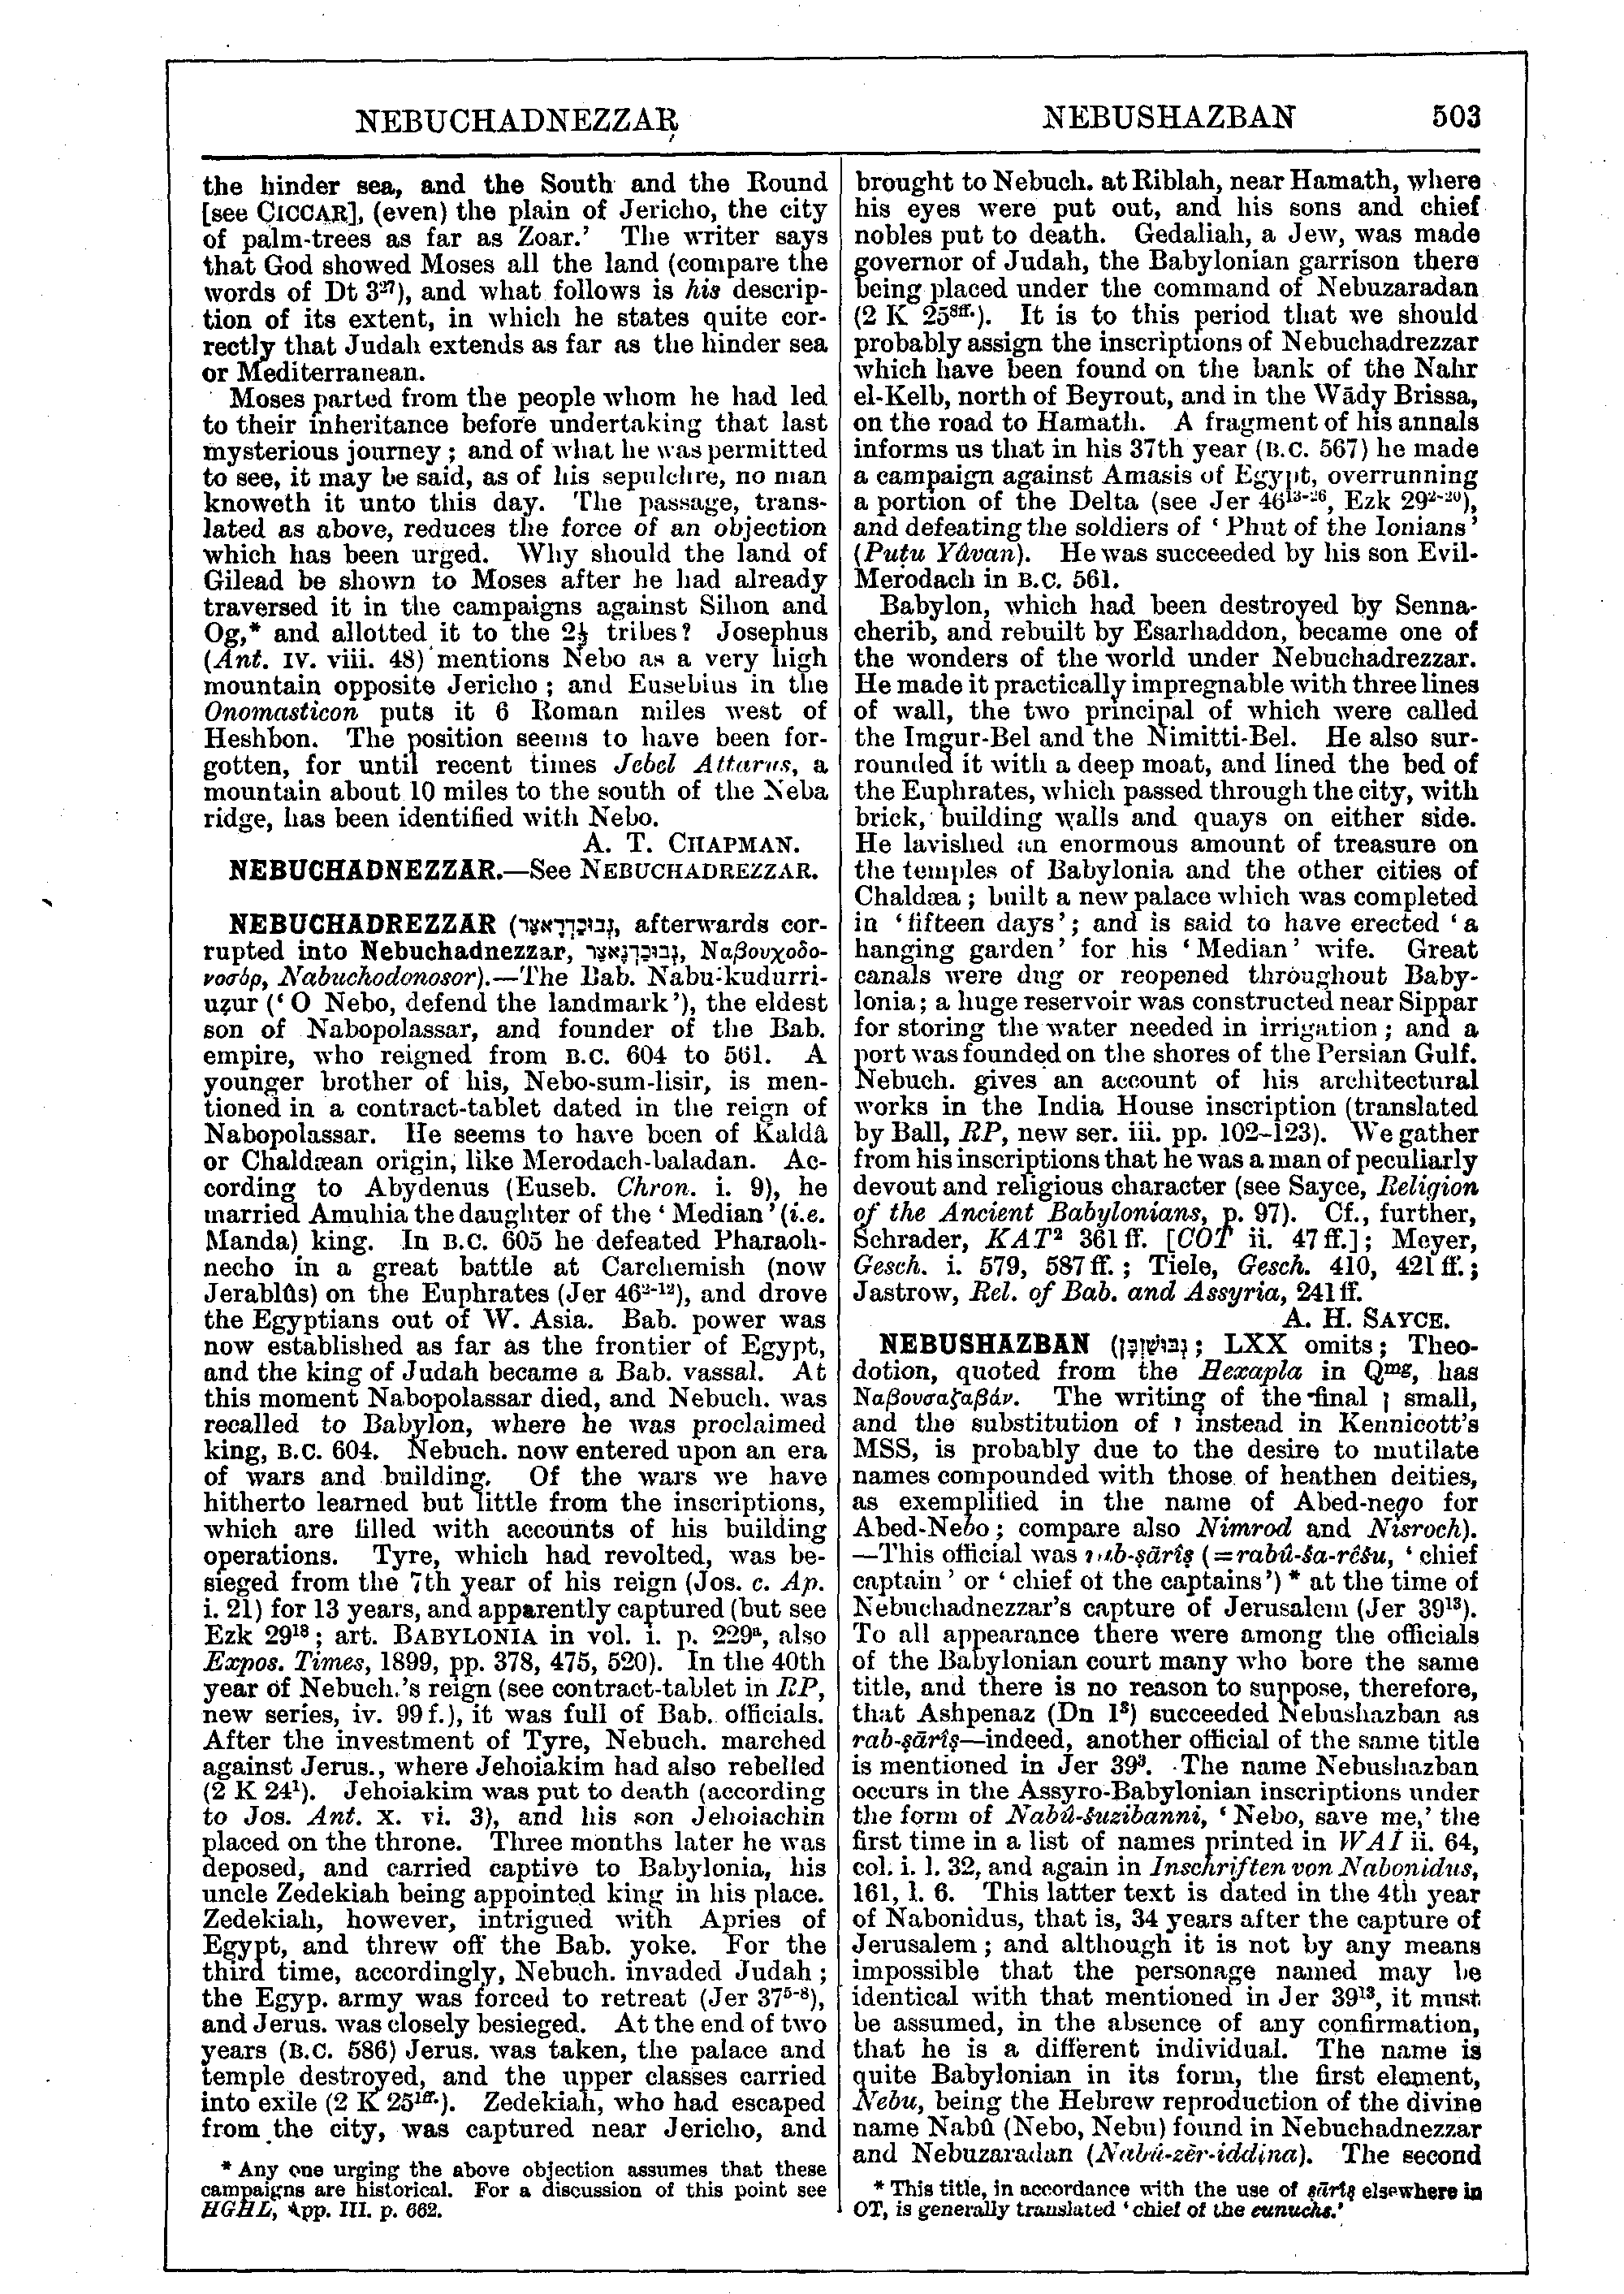 Image of page 503